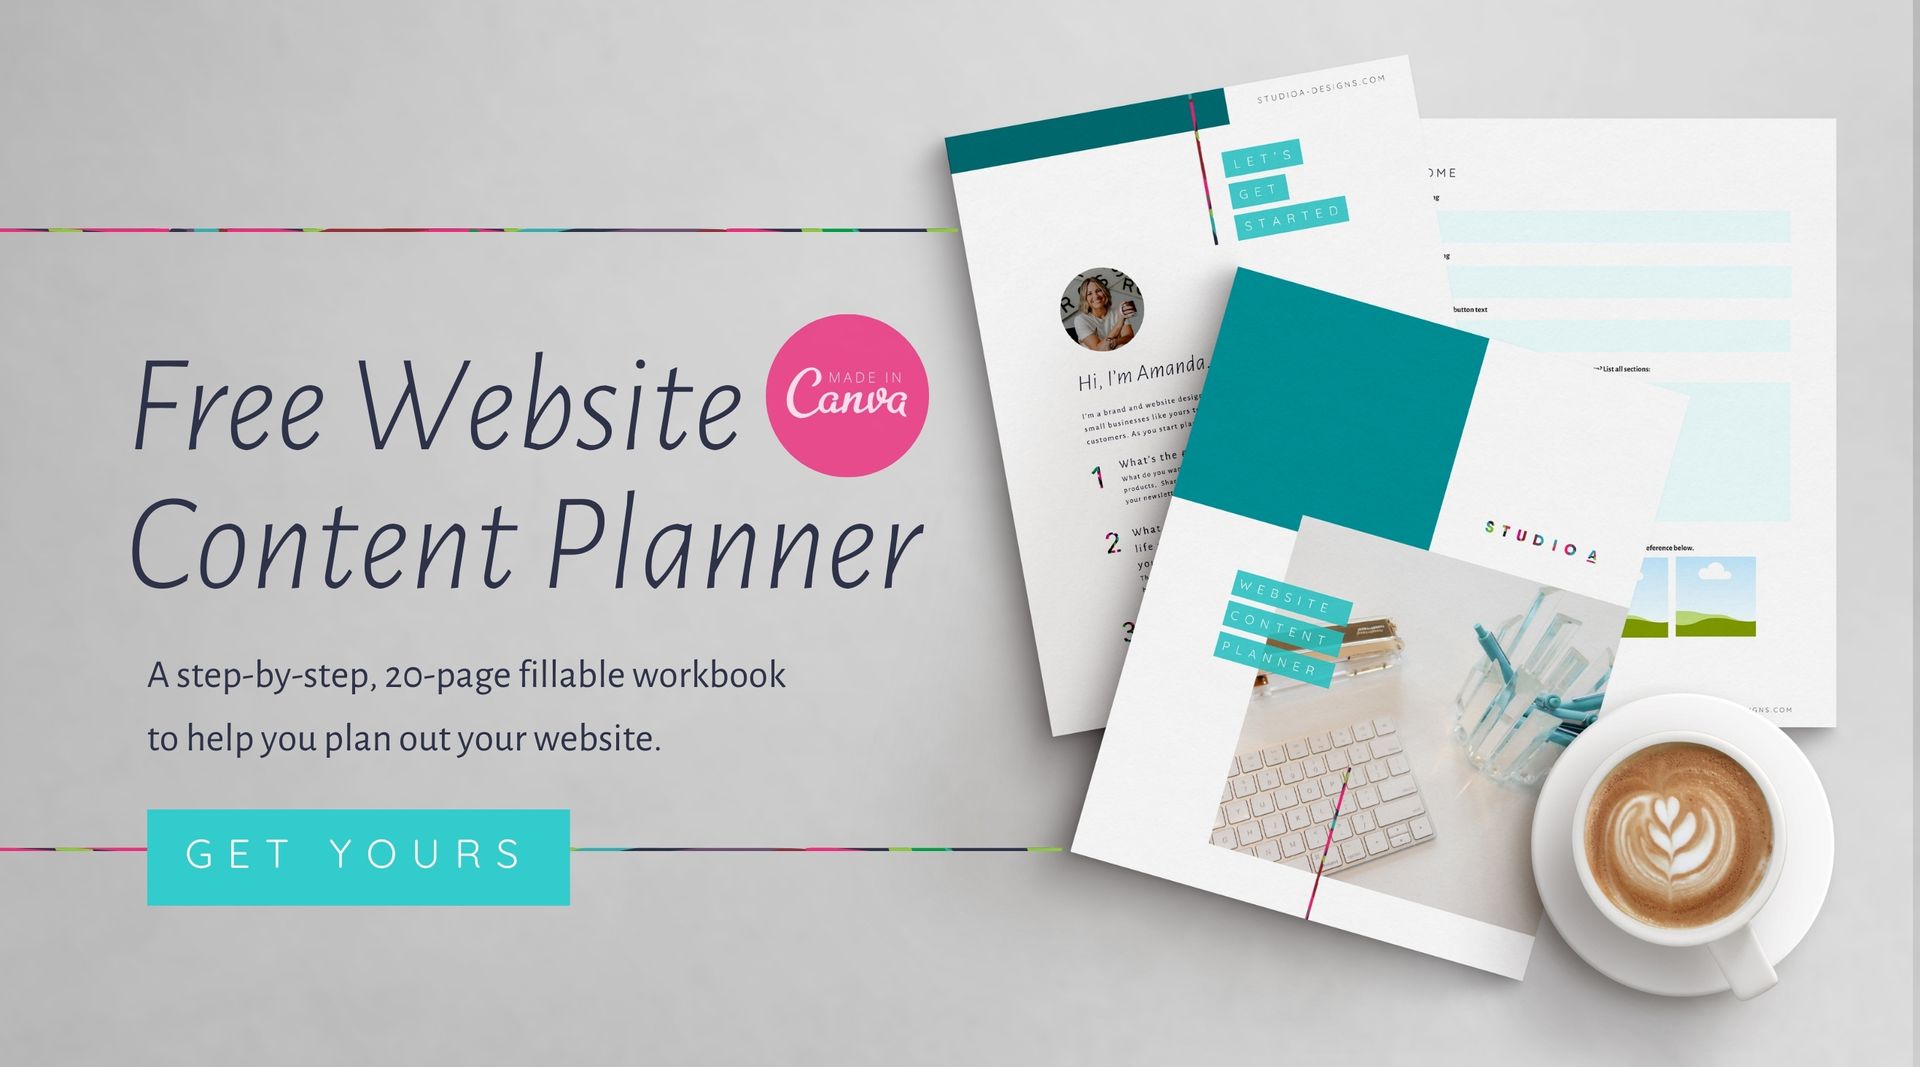 Free Website Content Planner in Canva